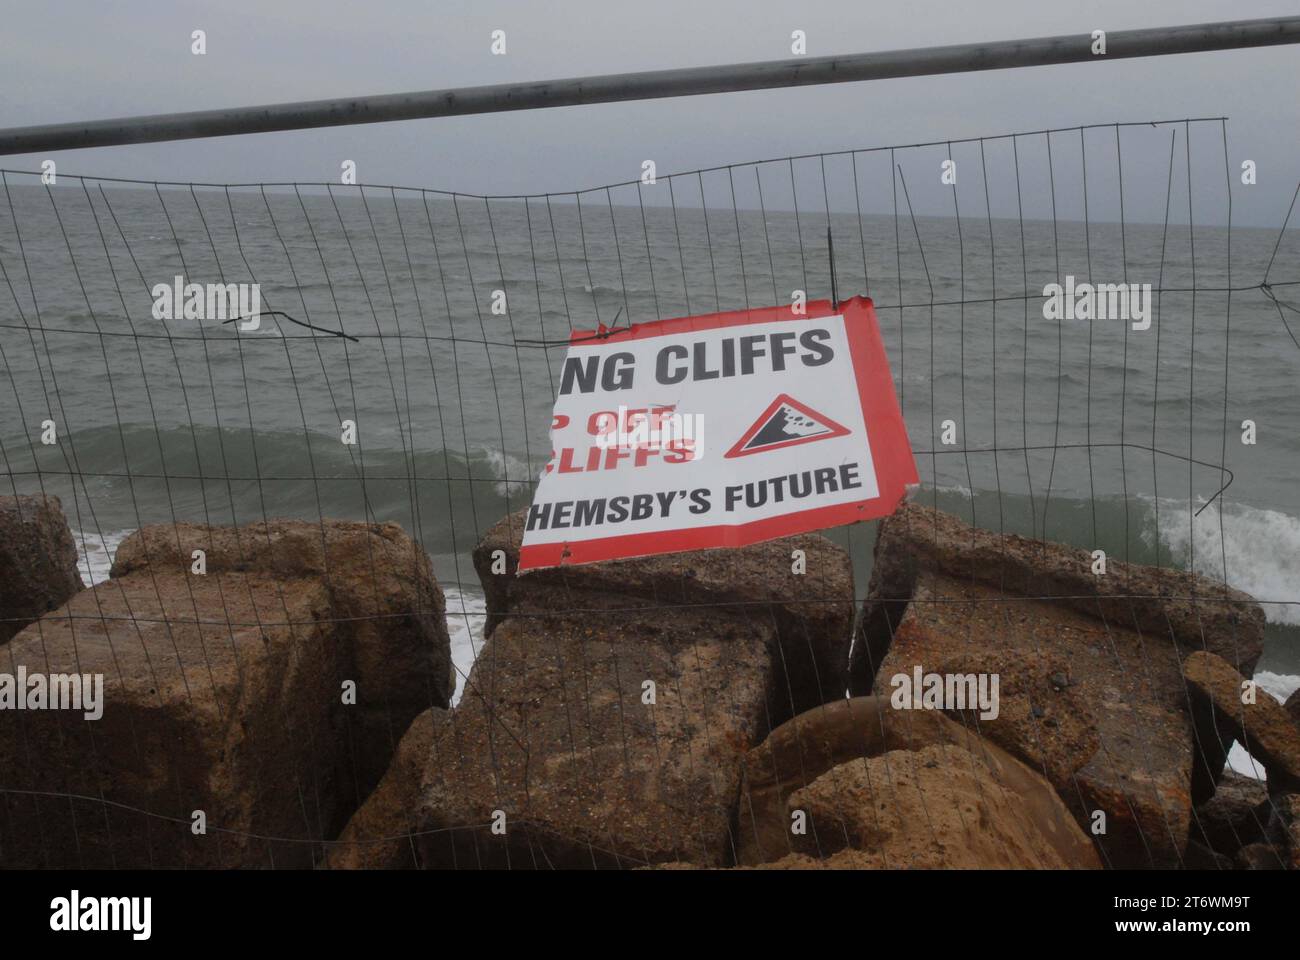 Ripped sign hanging on fence, asking beach visitors to avoid crumbling cliffs to protect Hemsby's future, blown by wind, during high seas. Hemsby Gap Stock Photo